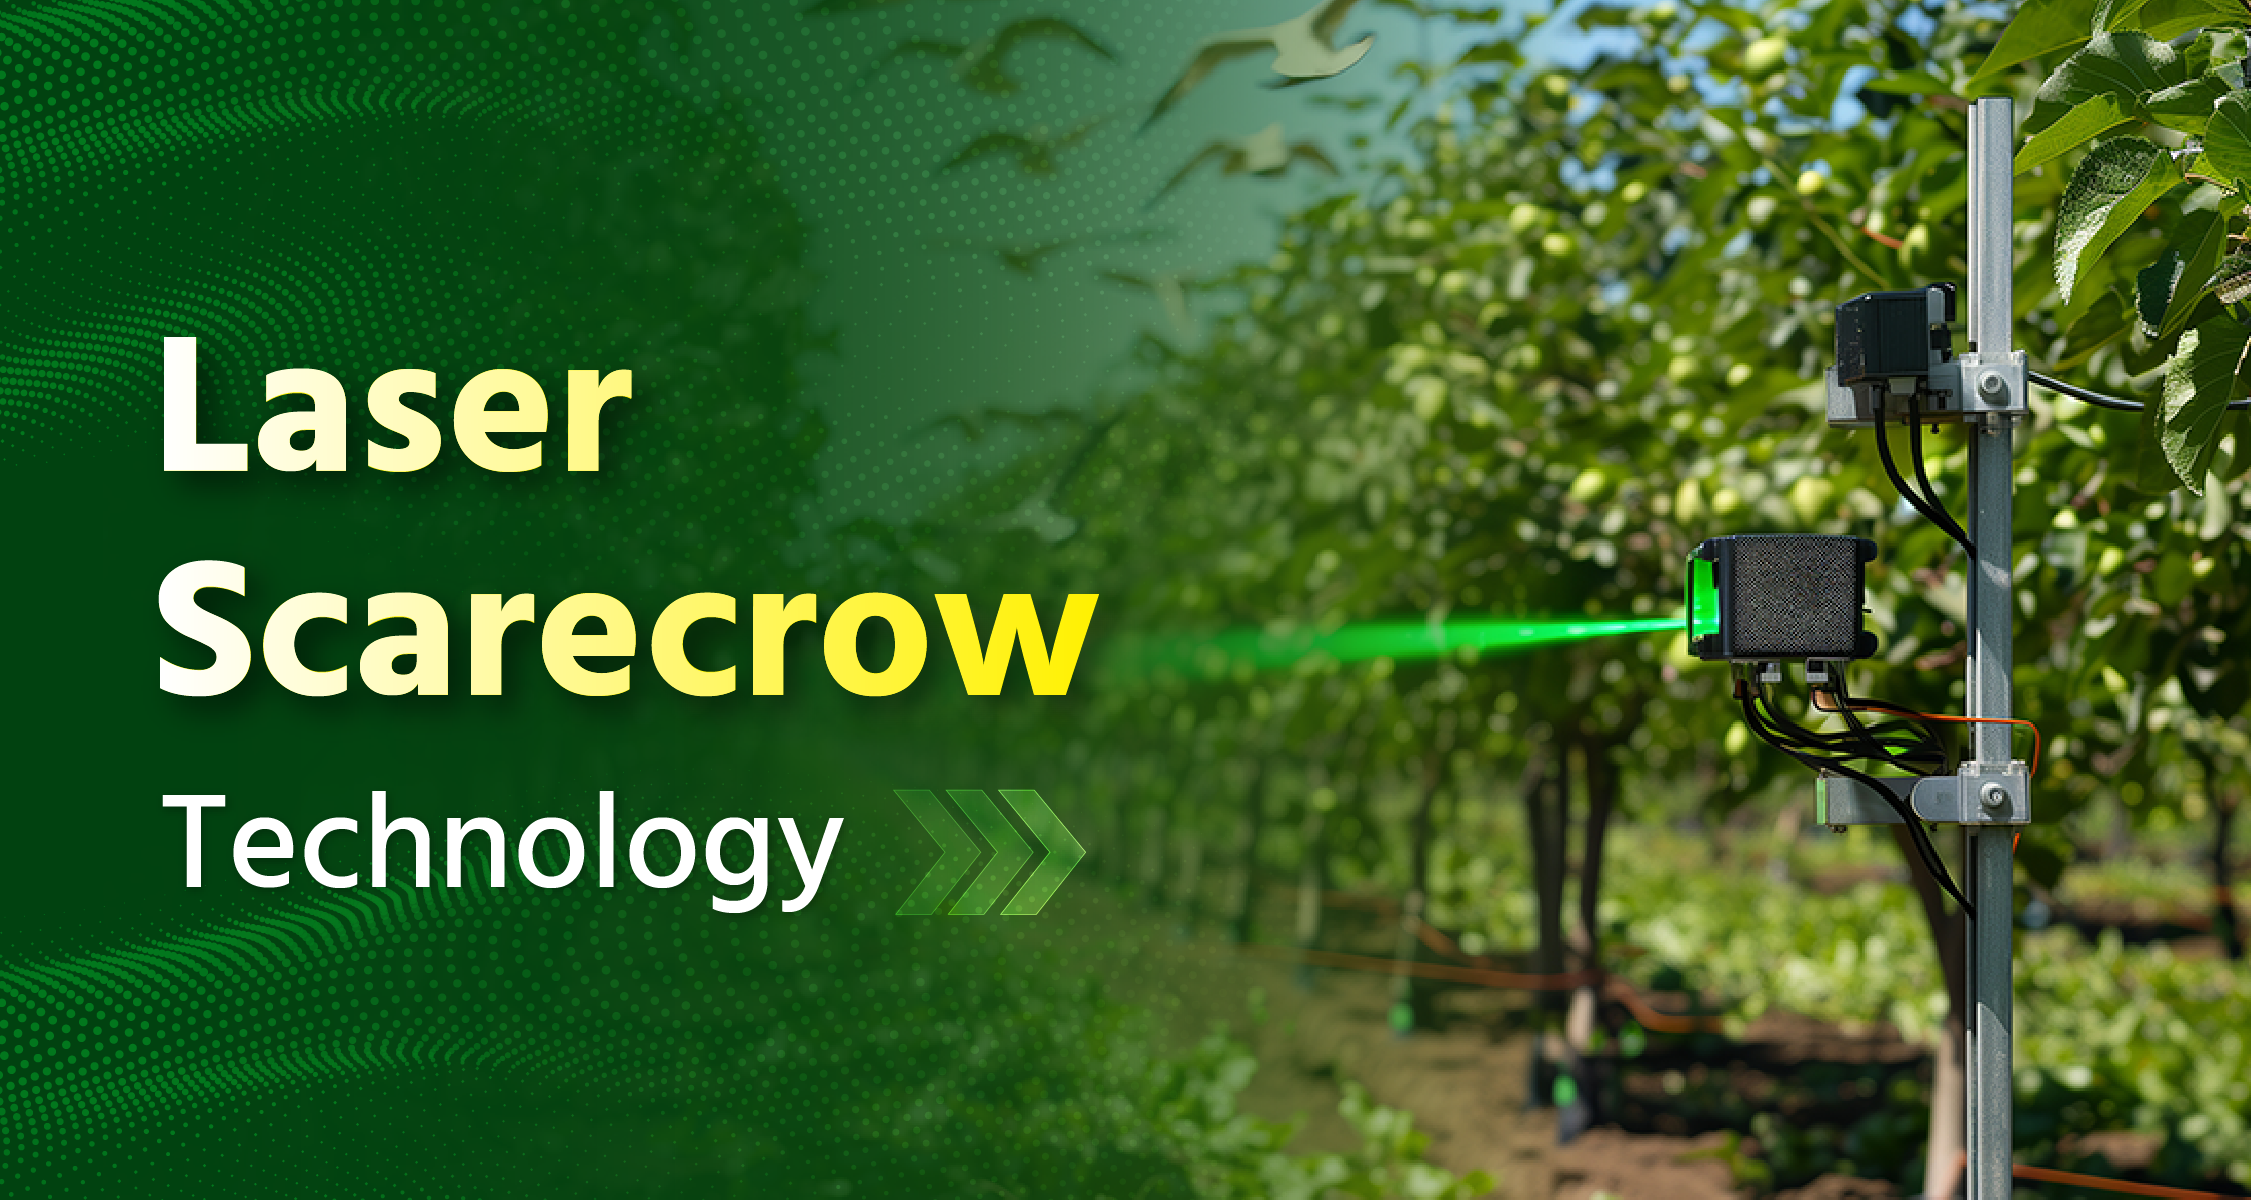 Laser Scarecrow Technology